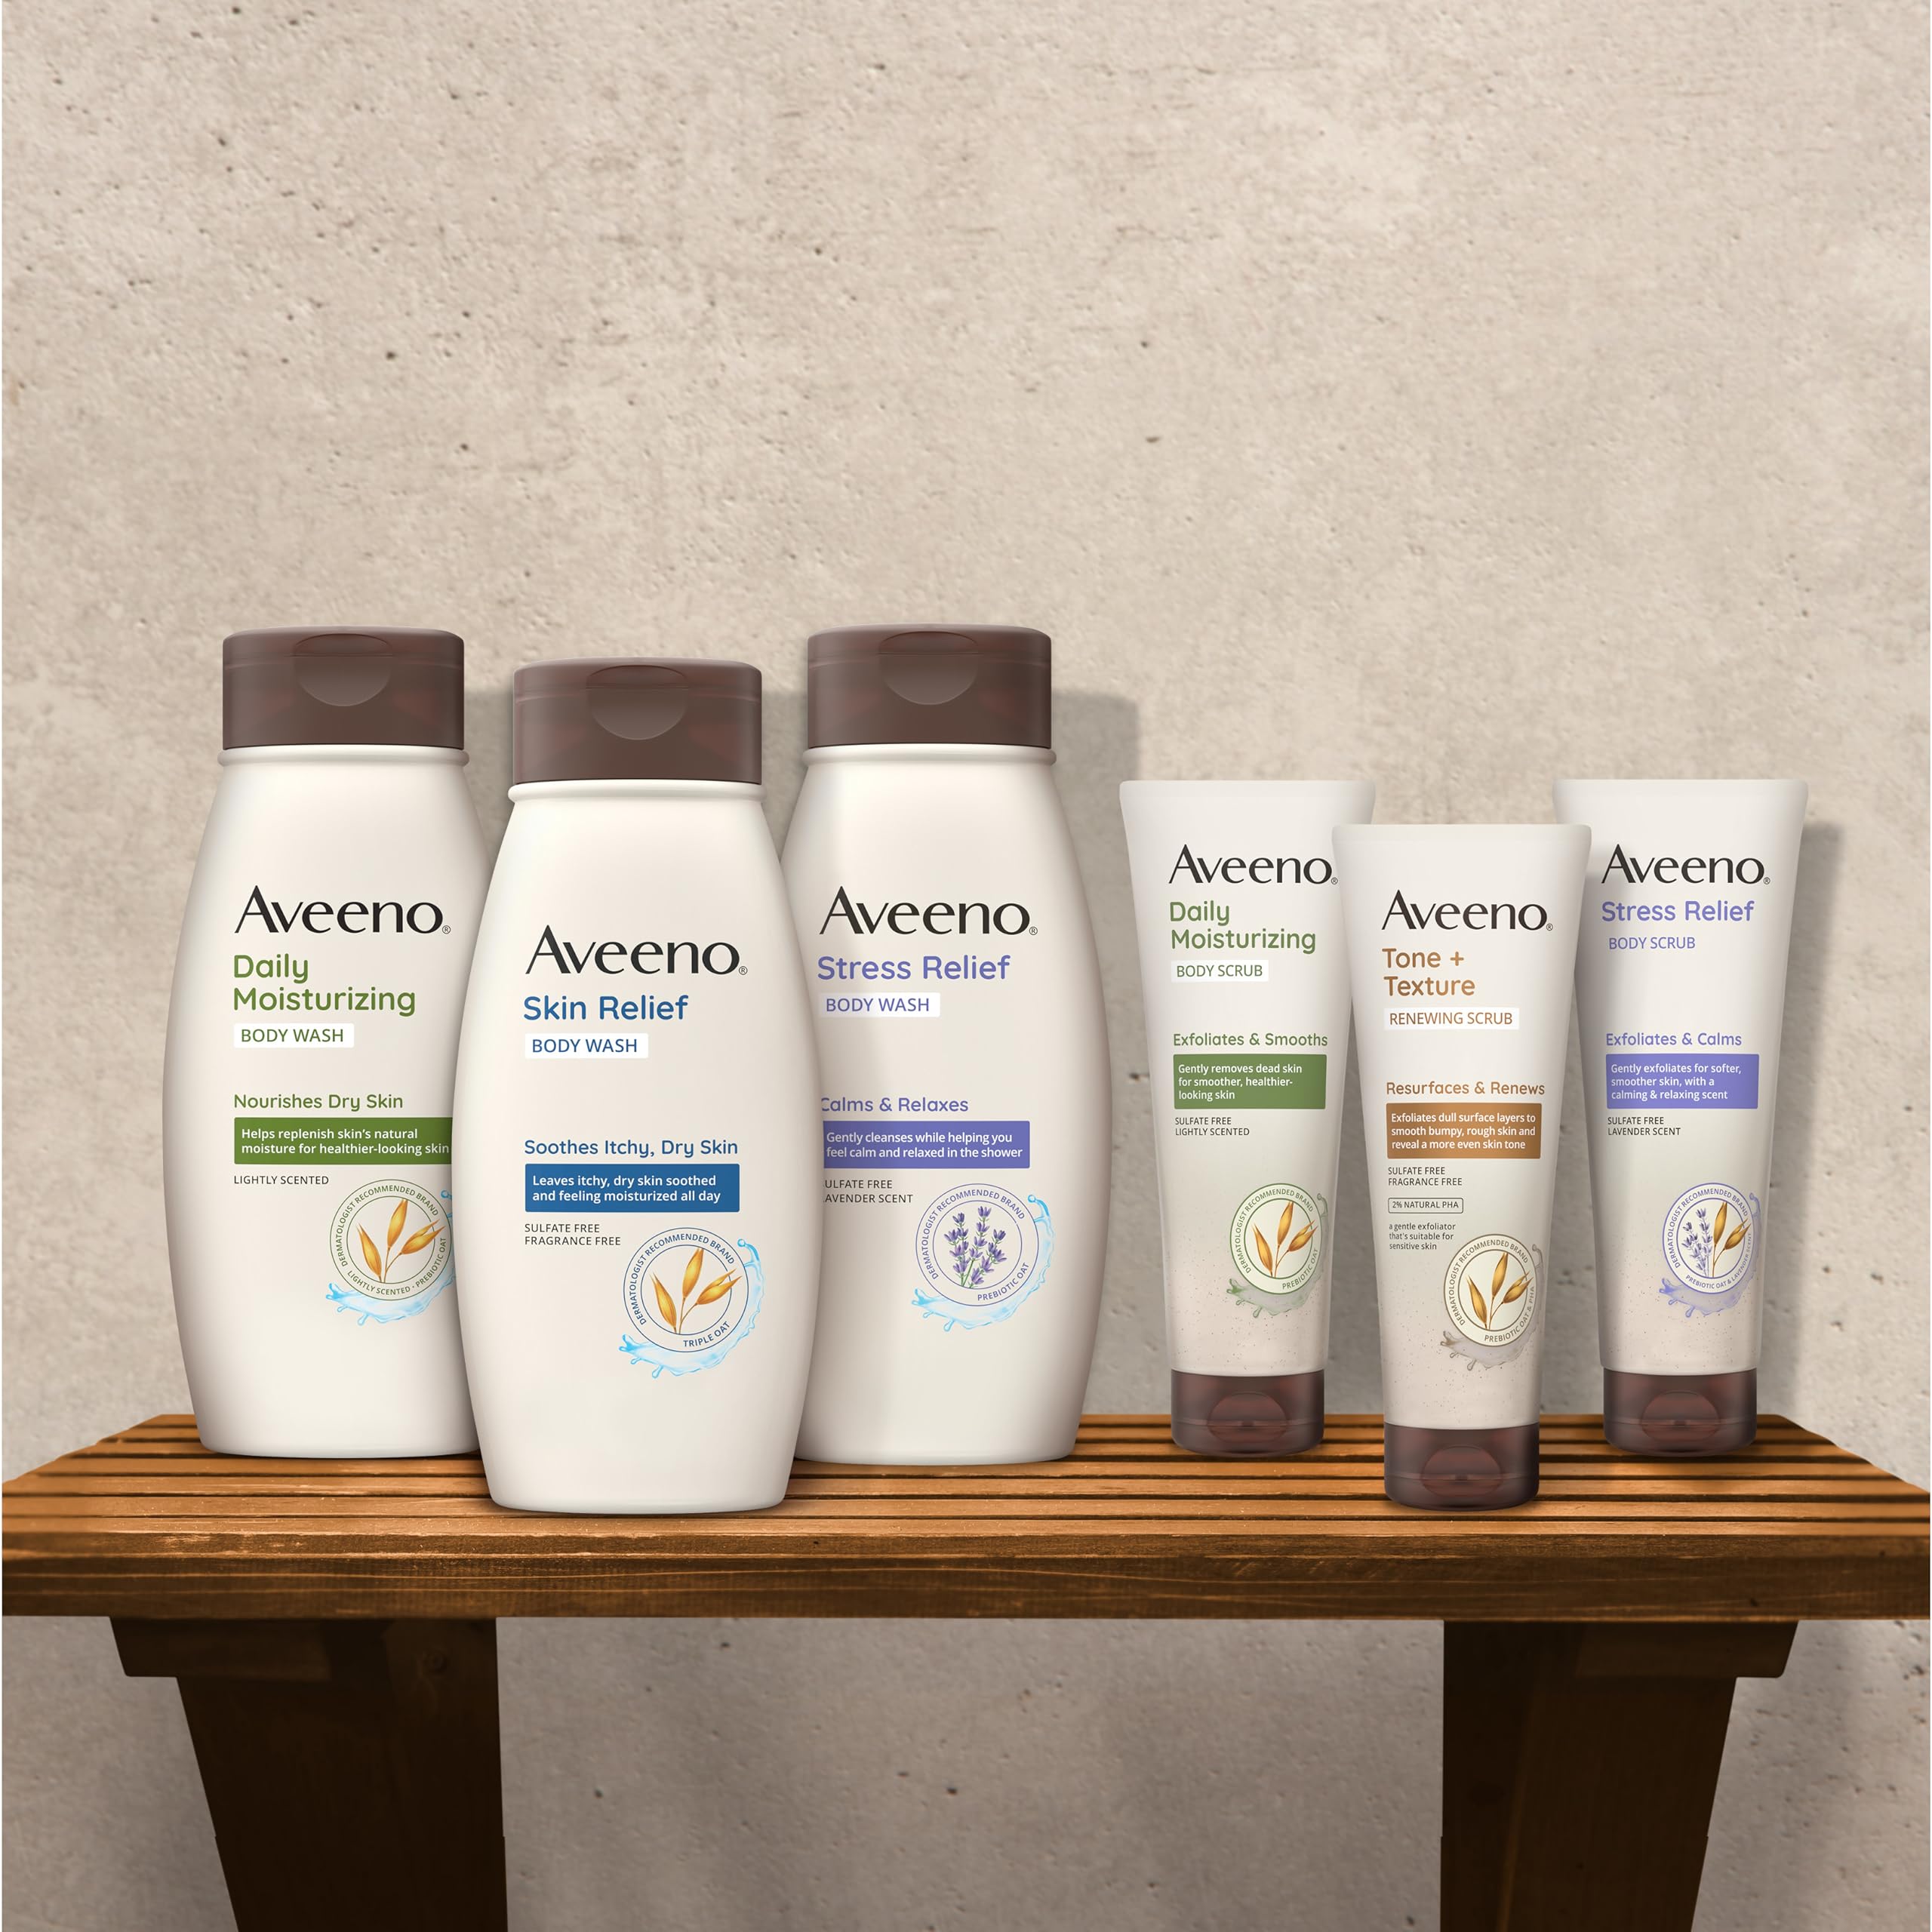 Aveeno Skin Relief Fragrance-Free Body Wash with Triple Oat Formula, Gentle Daily Cleanser for Sensitive Skin Leaves Dry Skin Feeling Moisturized, Sulfate-Free, Twin Pack, 2 x 18 fl. oz